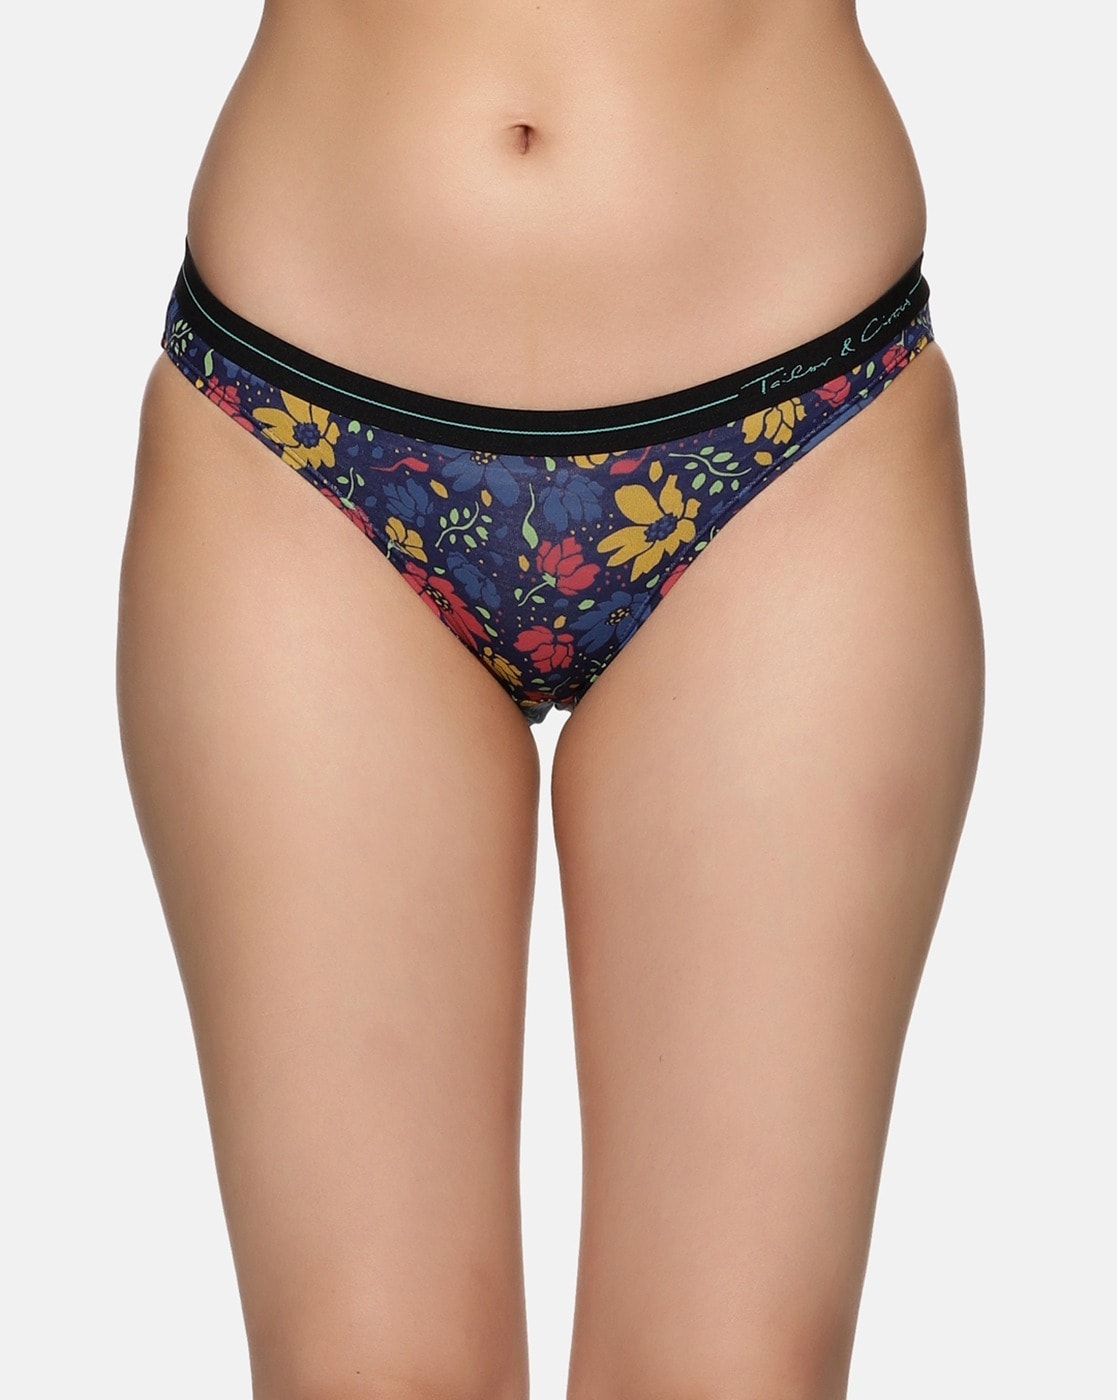 Buy Tailor And Circus Floral Print Seamless Bikini Briefs at Redfynd